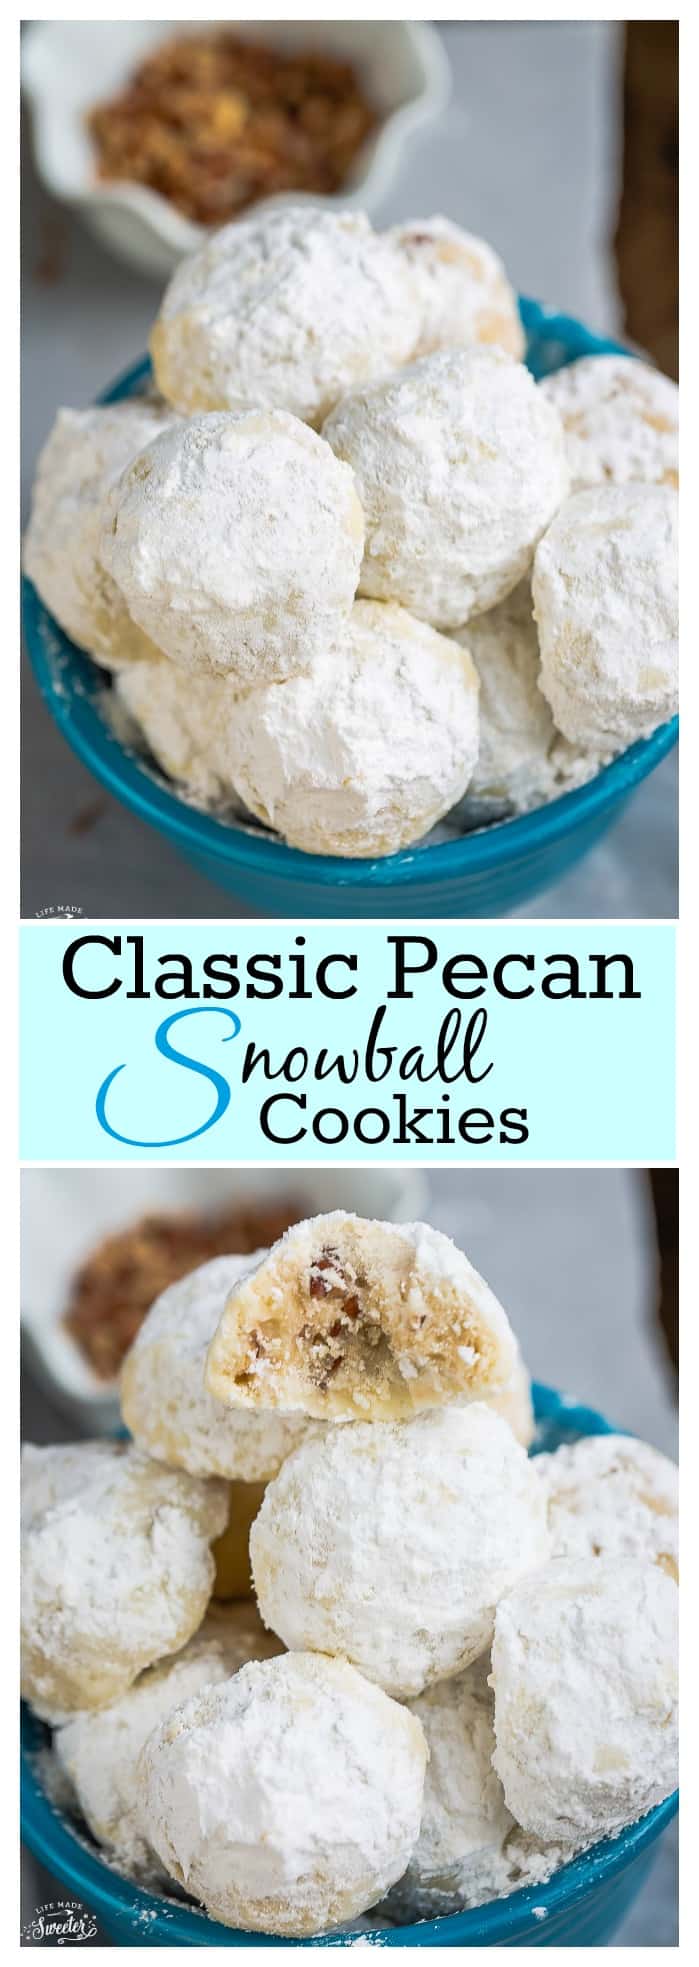 Snowball Cookies are perfect for your Christmas cookie tray!!!